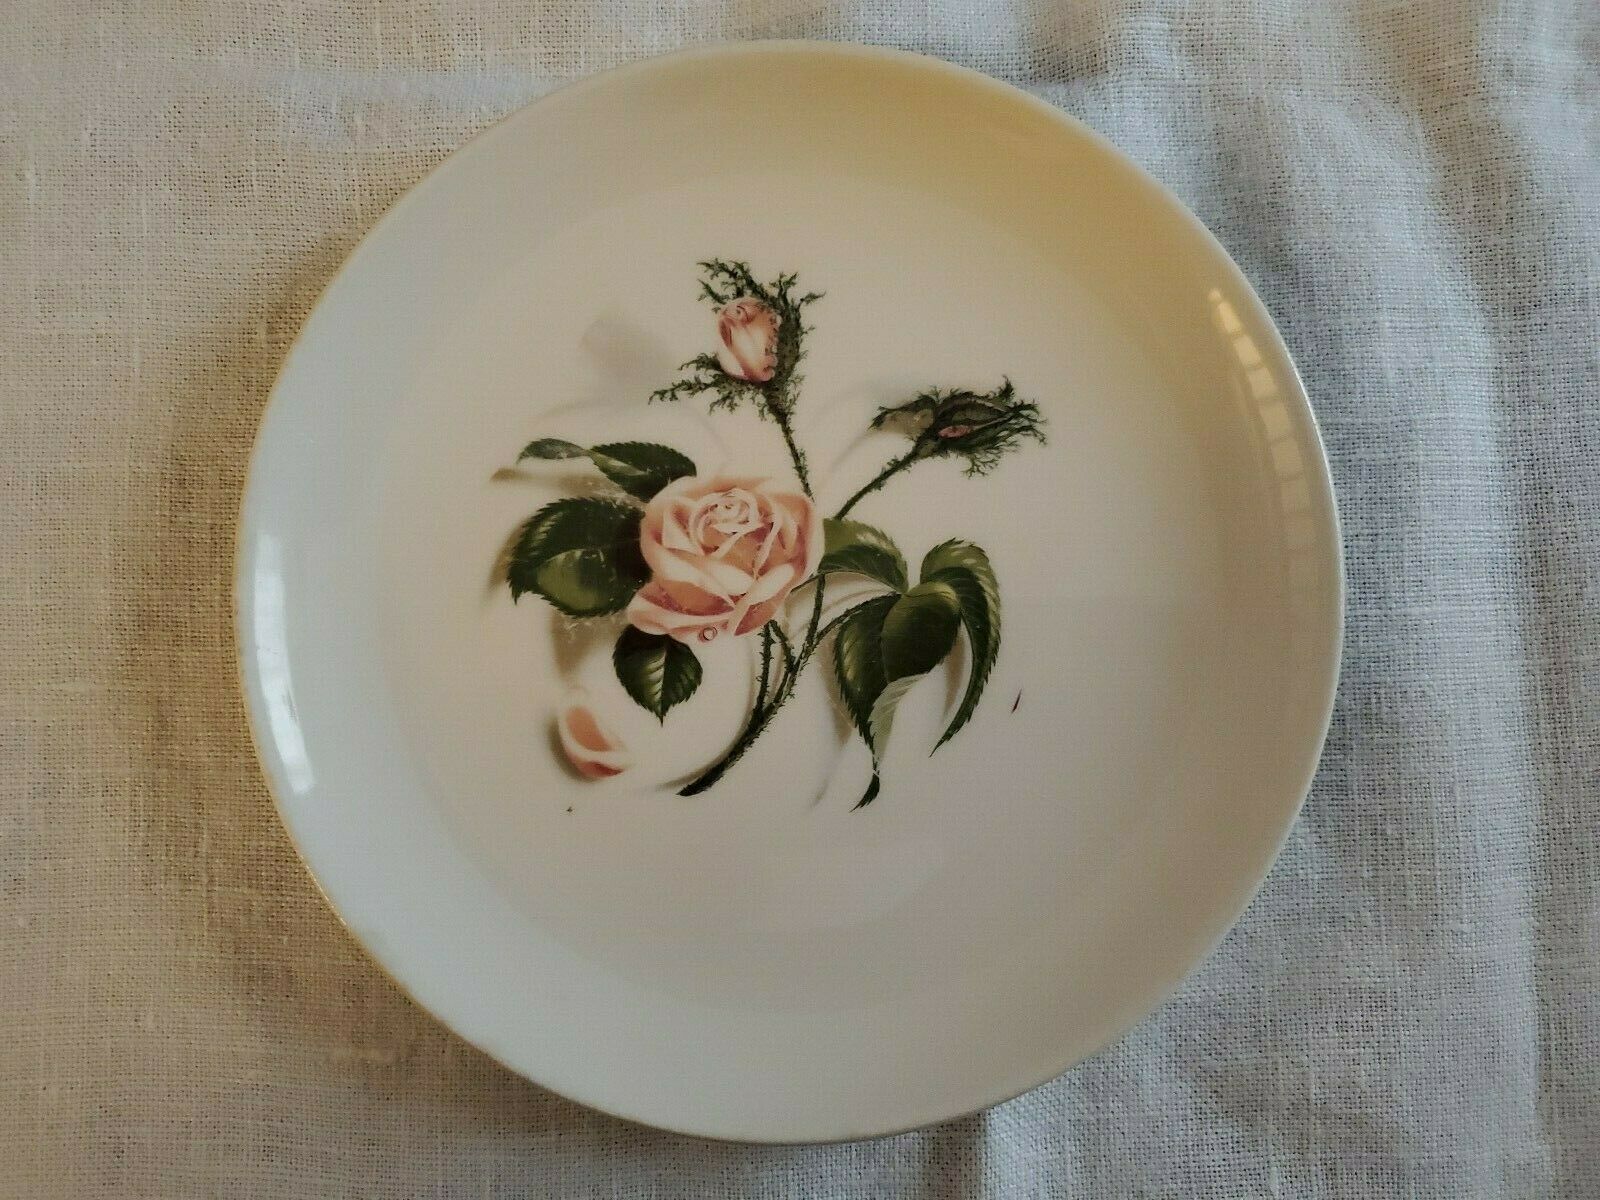 Ballerina Moss Rose Bread Plate Universal Oven Proof Usa  Vintage 1950s Mcm